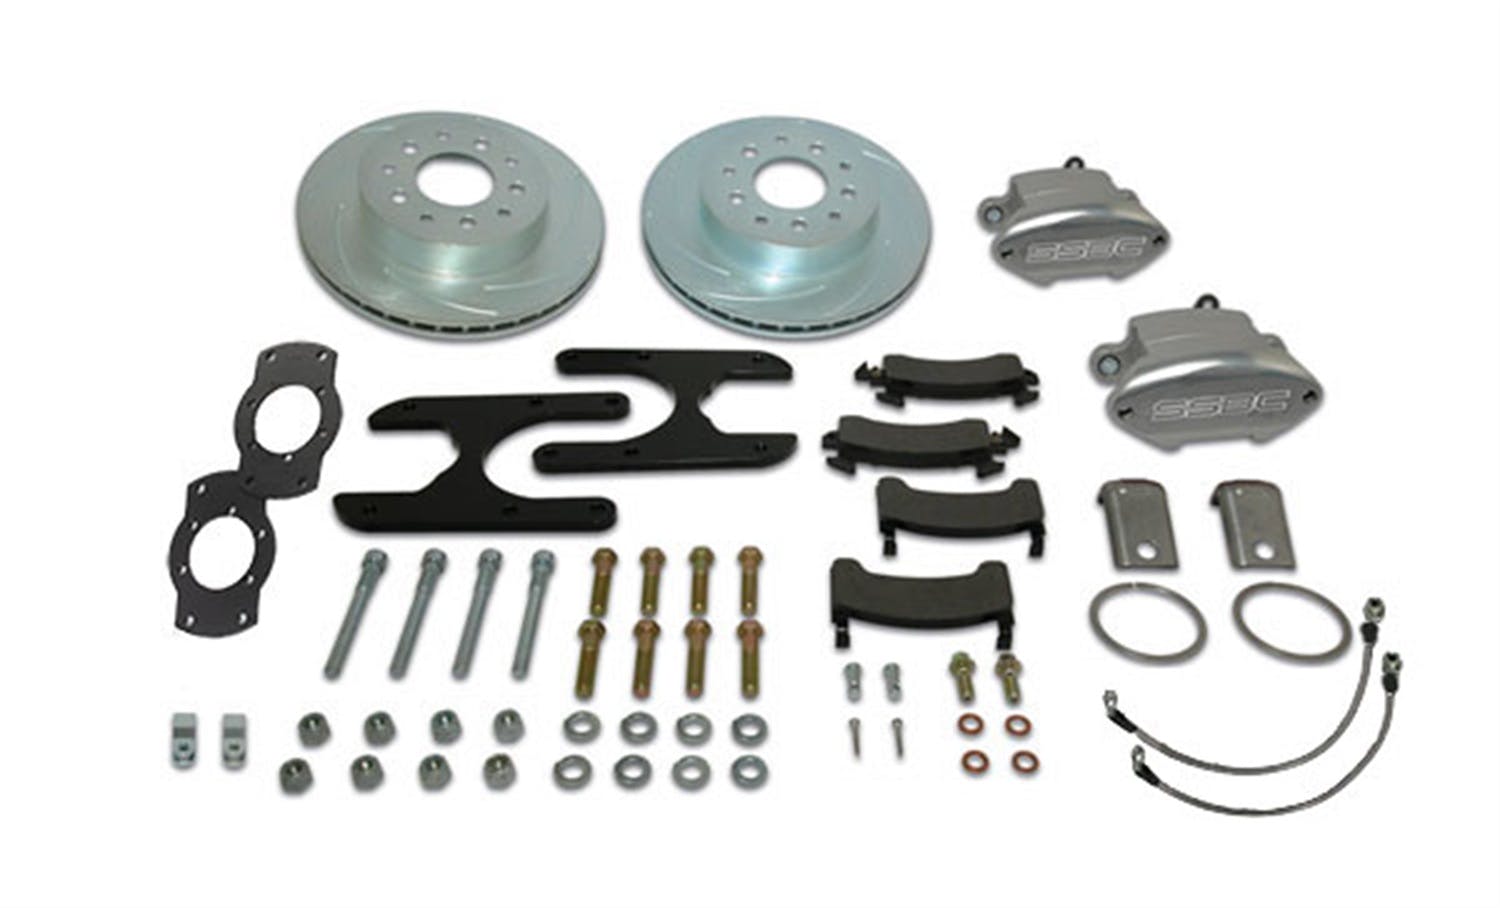 Stainless Steel Brakes A125-26BK Kit A125-26 w/black calipers